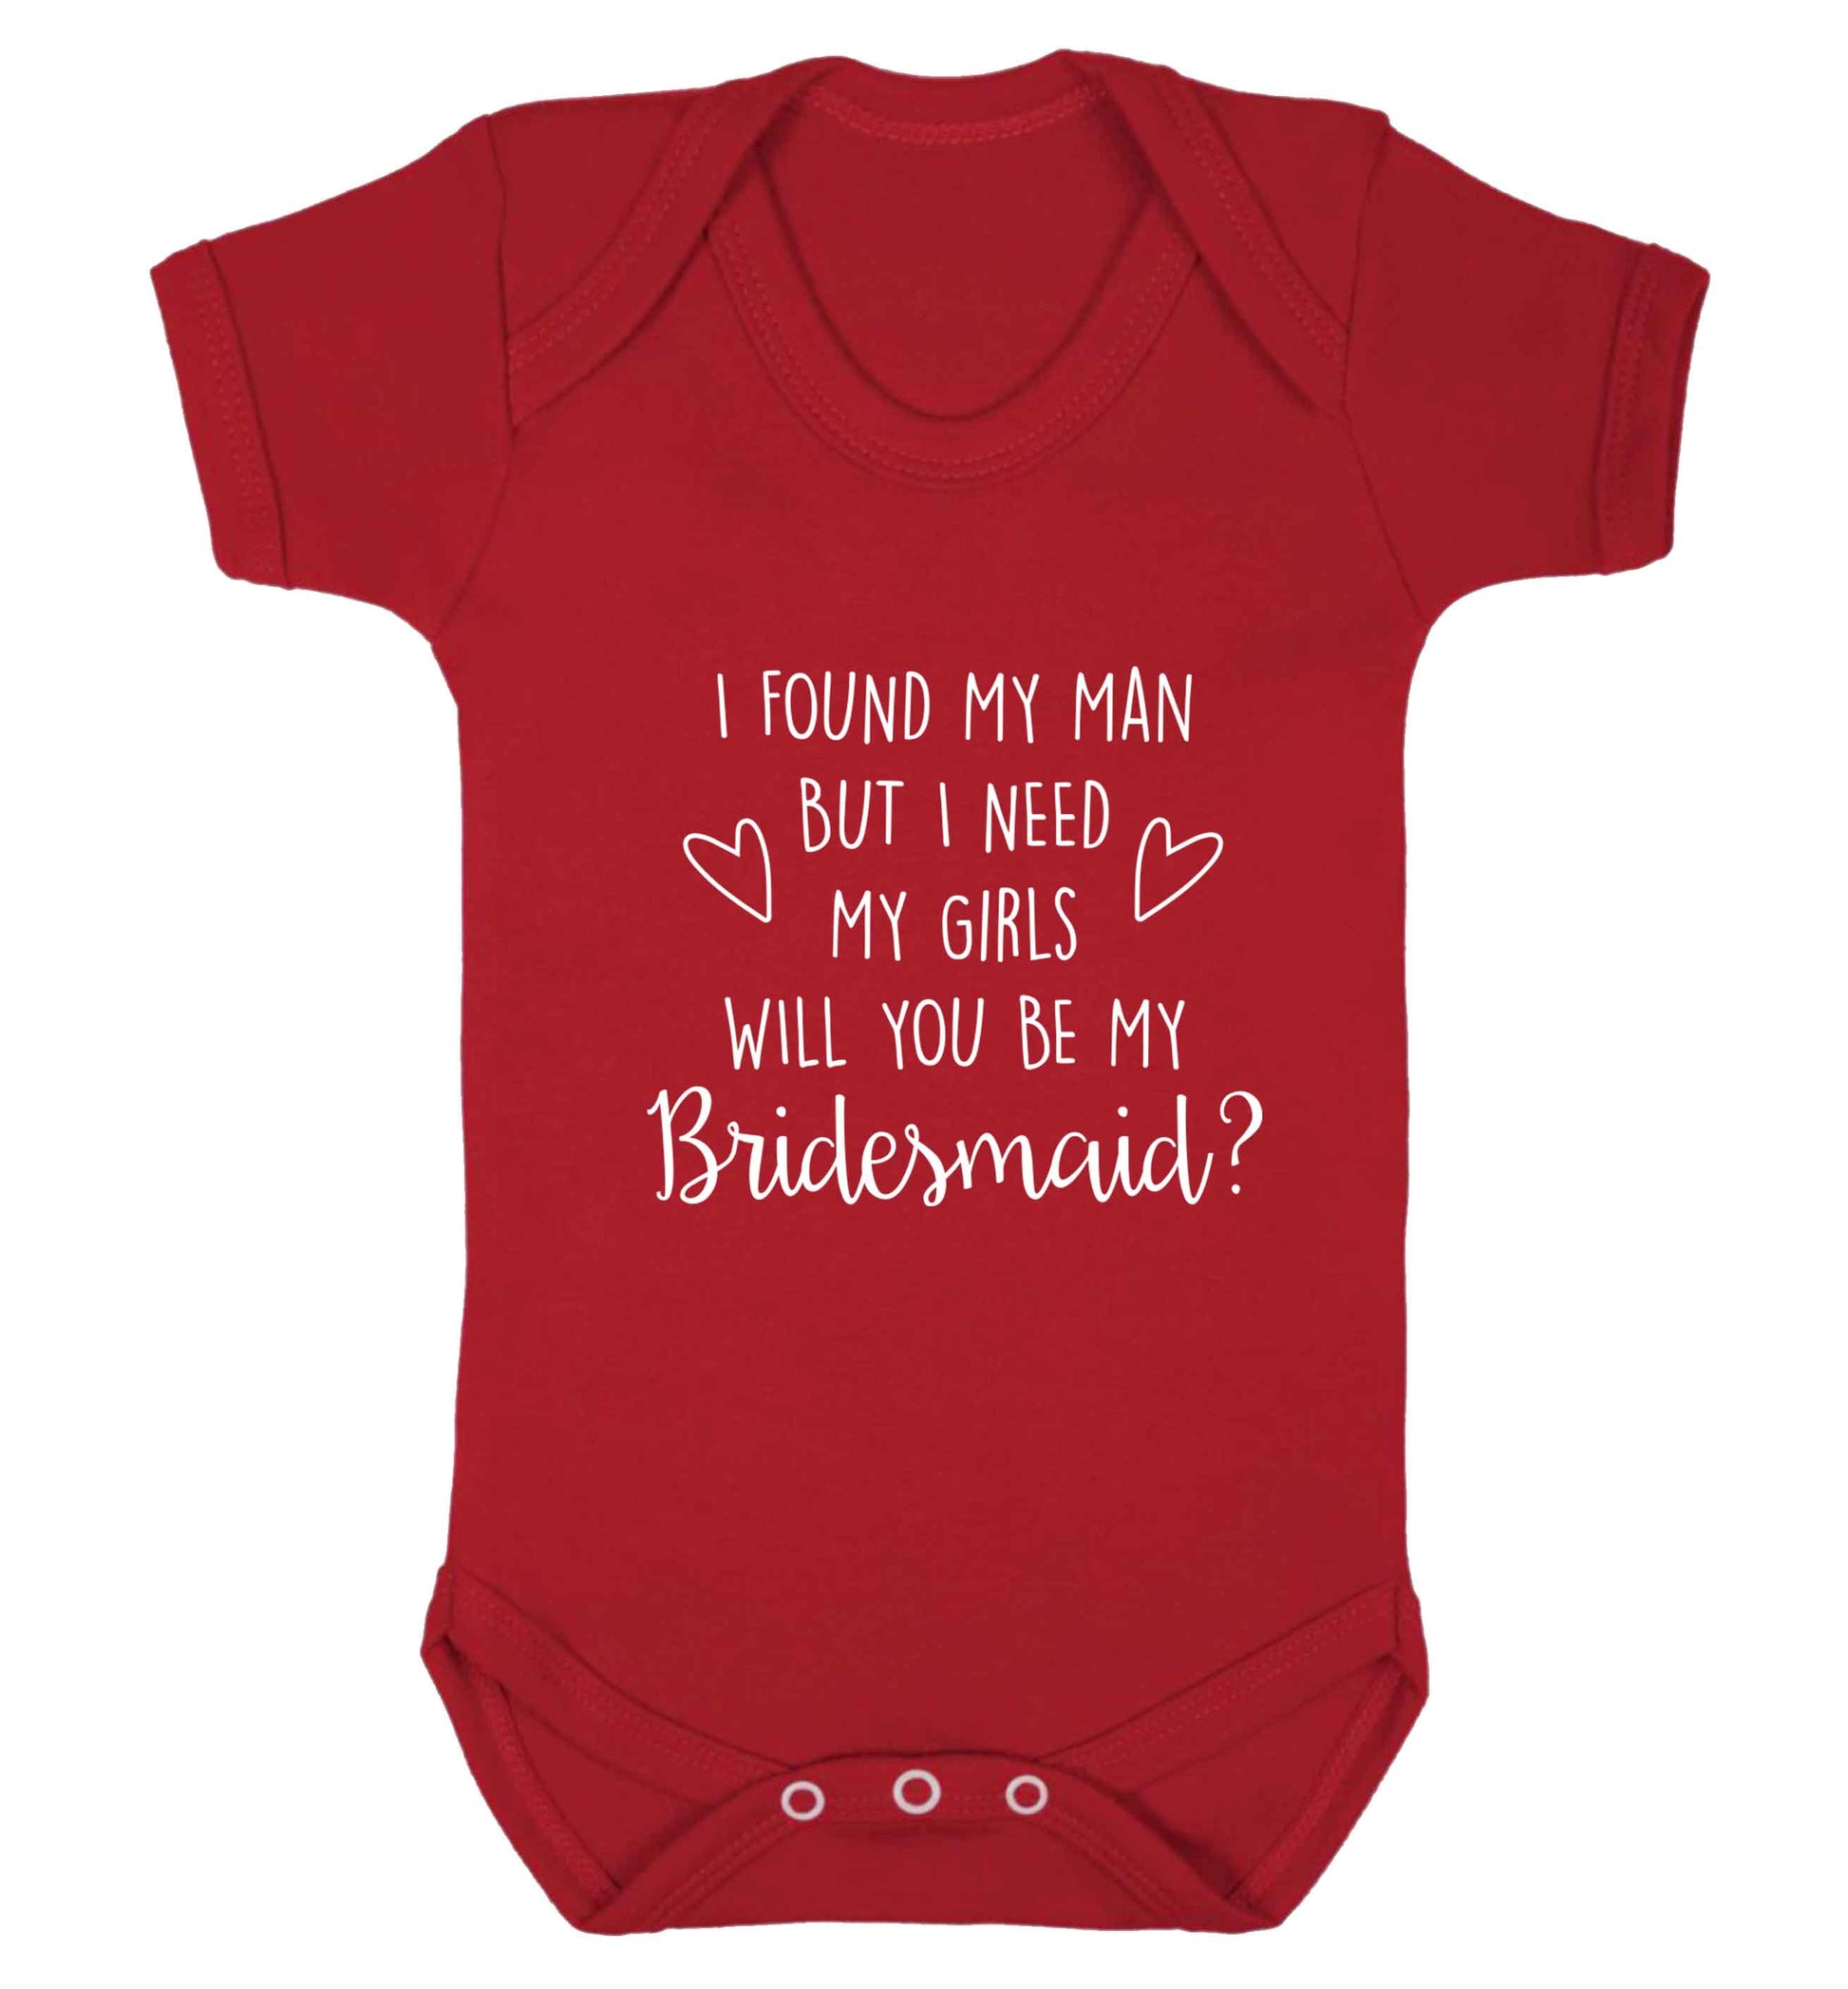 I found my man but I need my girls will you be my bridesmaid? baby vest red 18-24 months